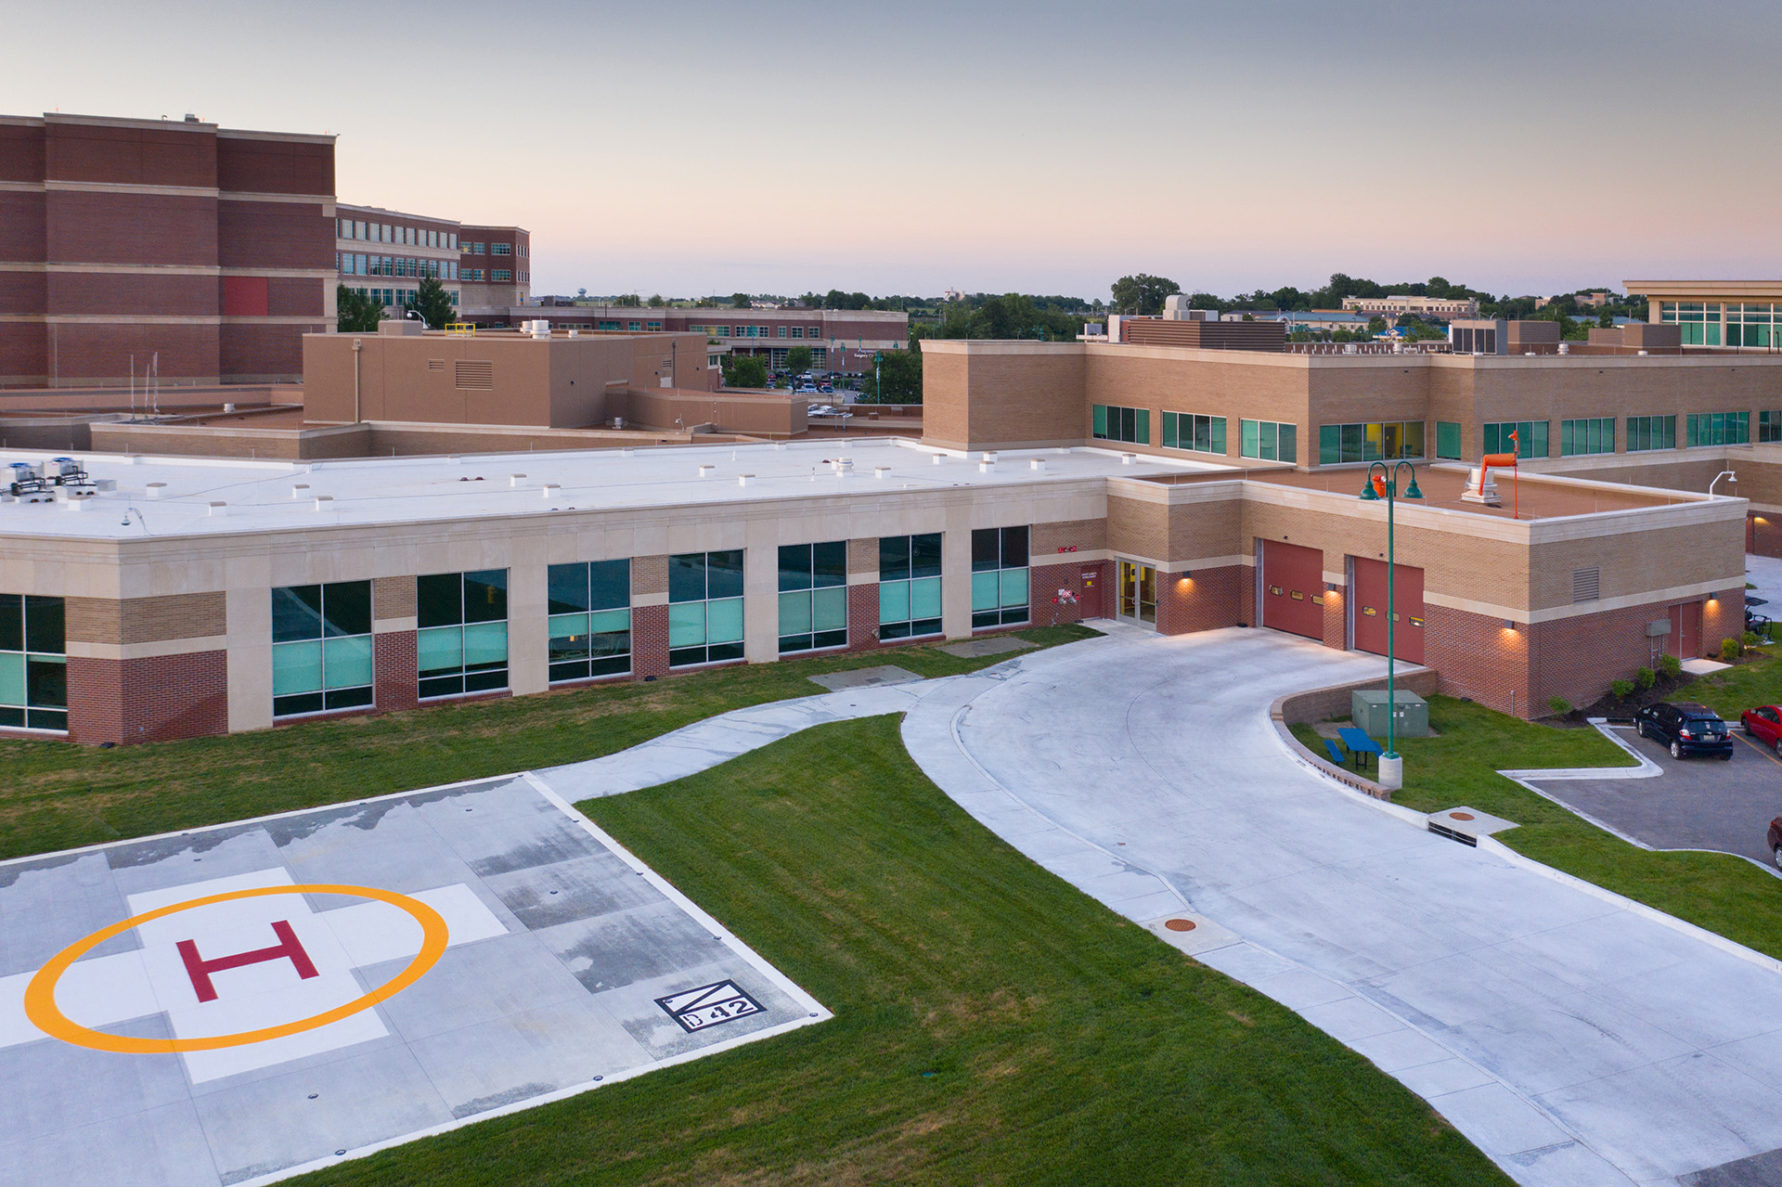 Helicopter landing pad at Saint Luke's East built by McCownGordon Construction